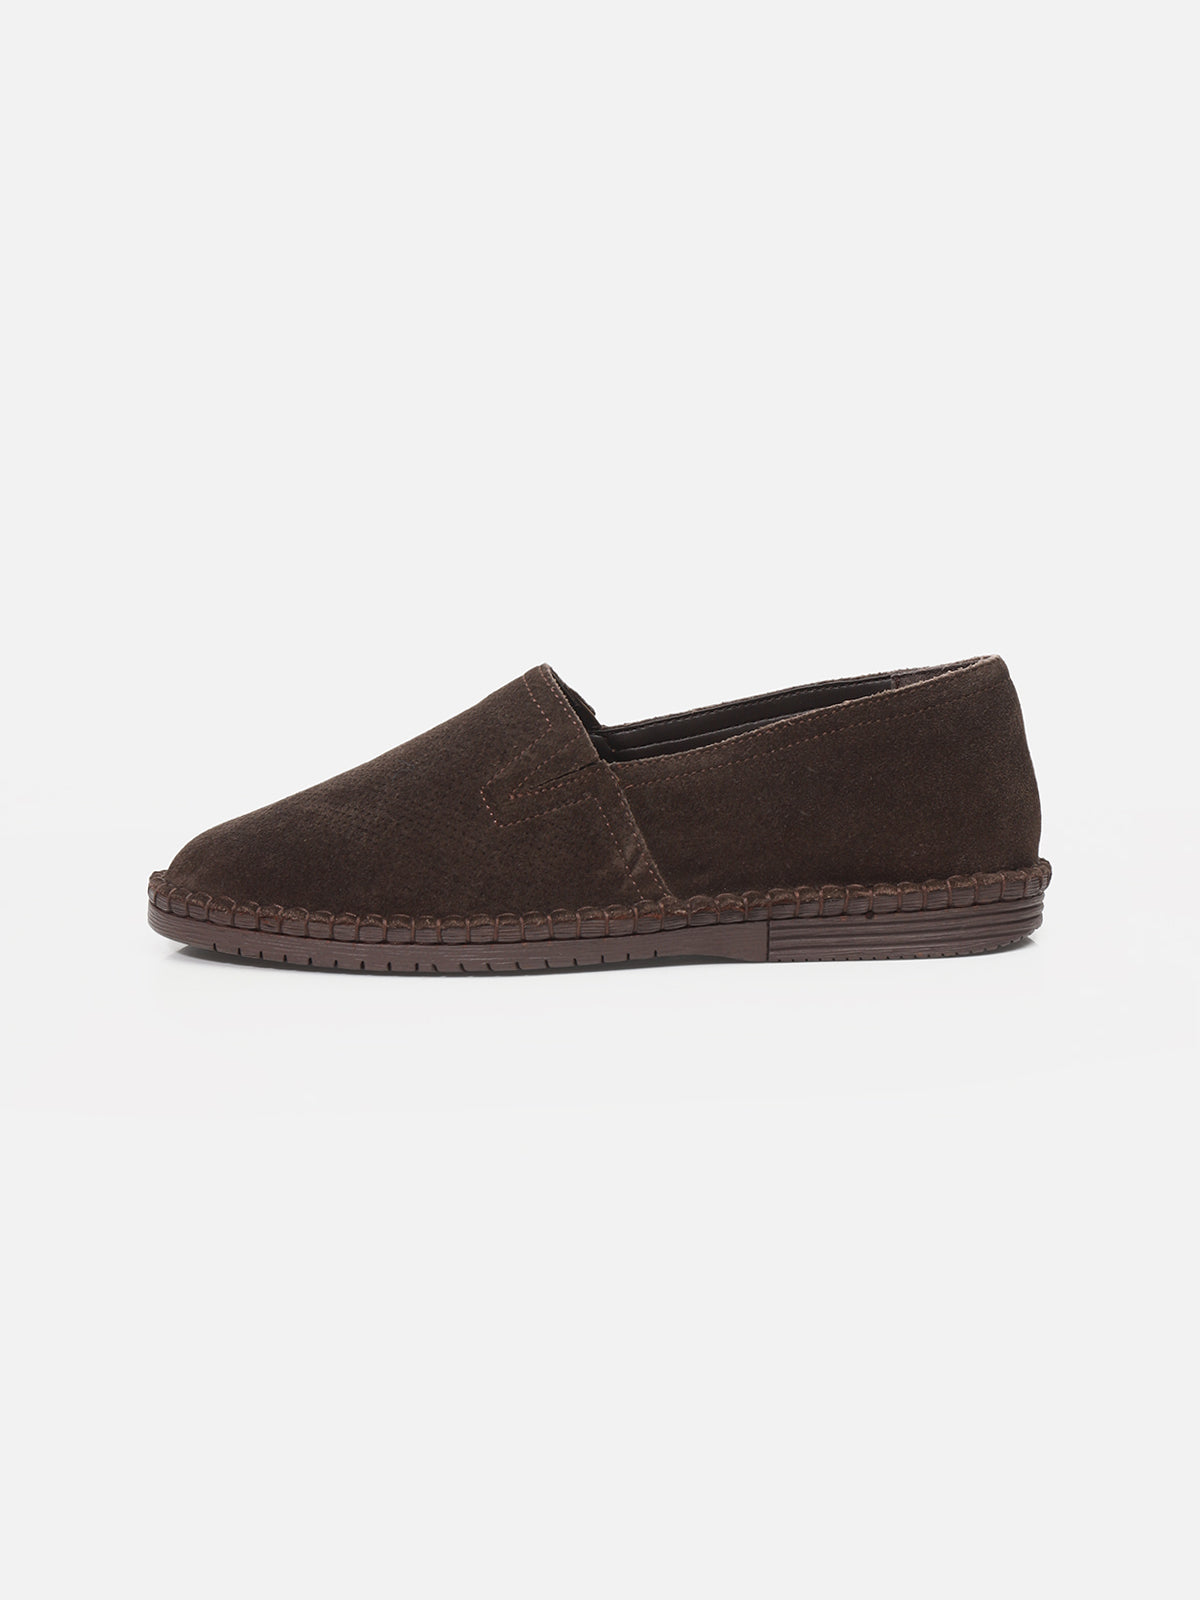 Slip-On Loafers - FAMS24-027